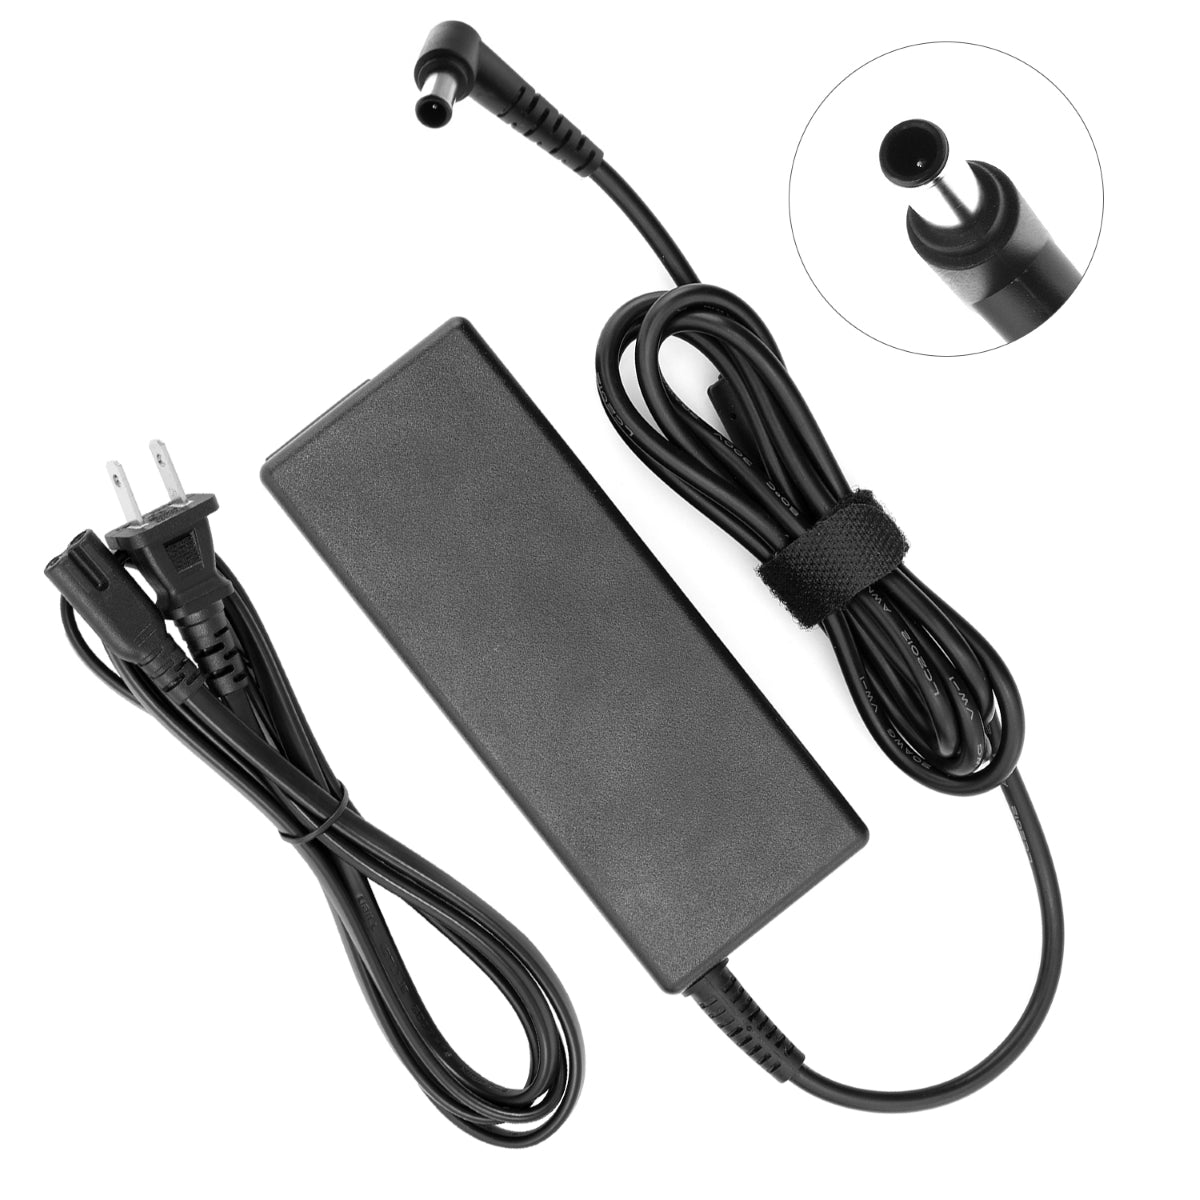 Power Adapter for LG 24MP60G-B Monitor TV